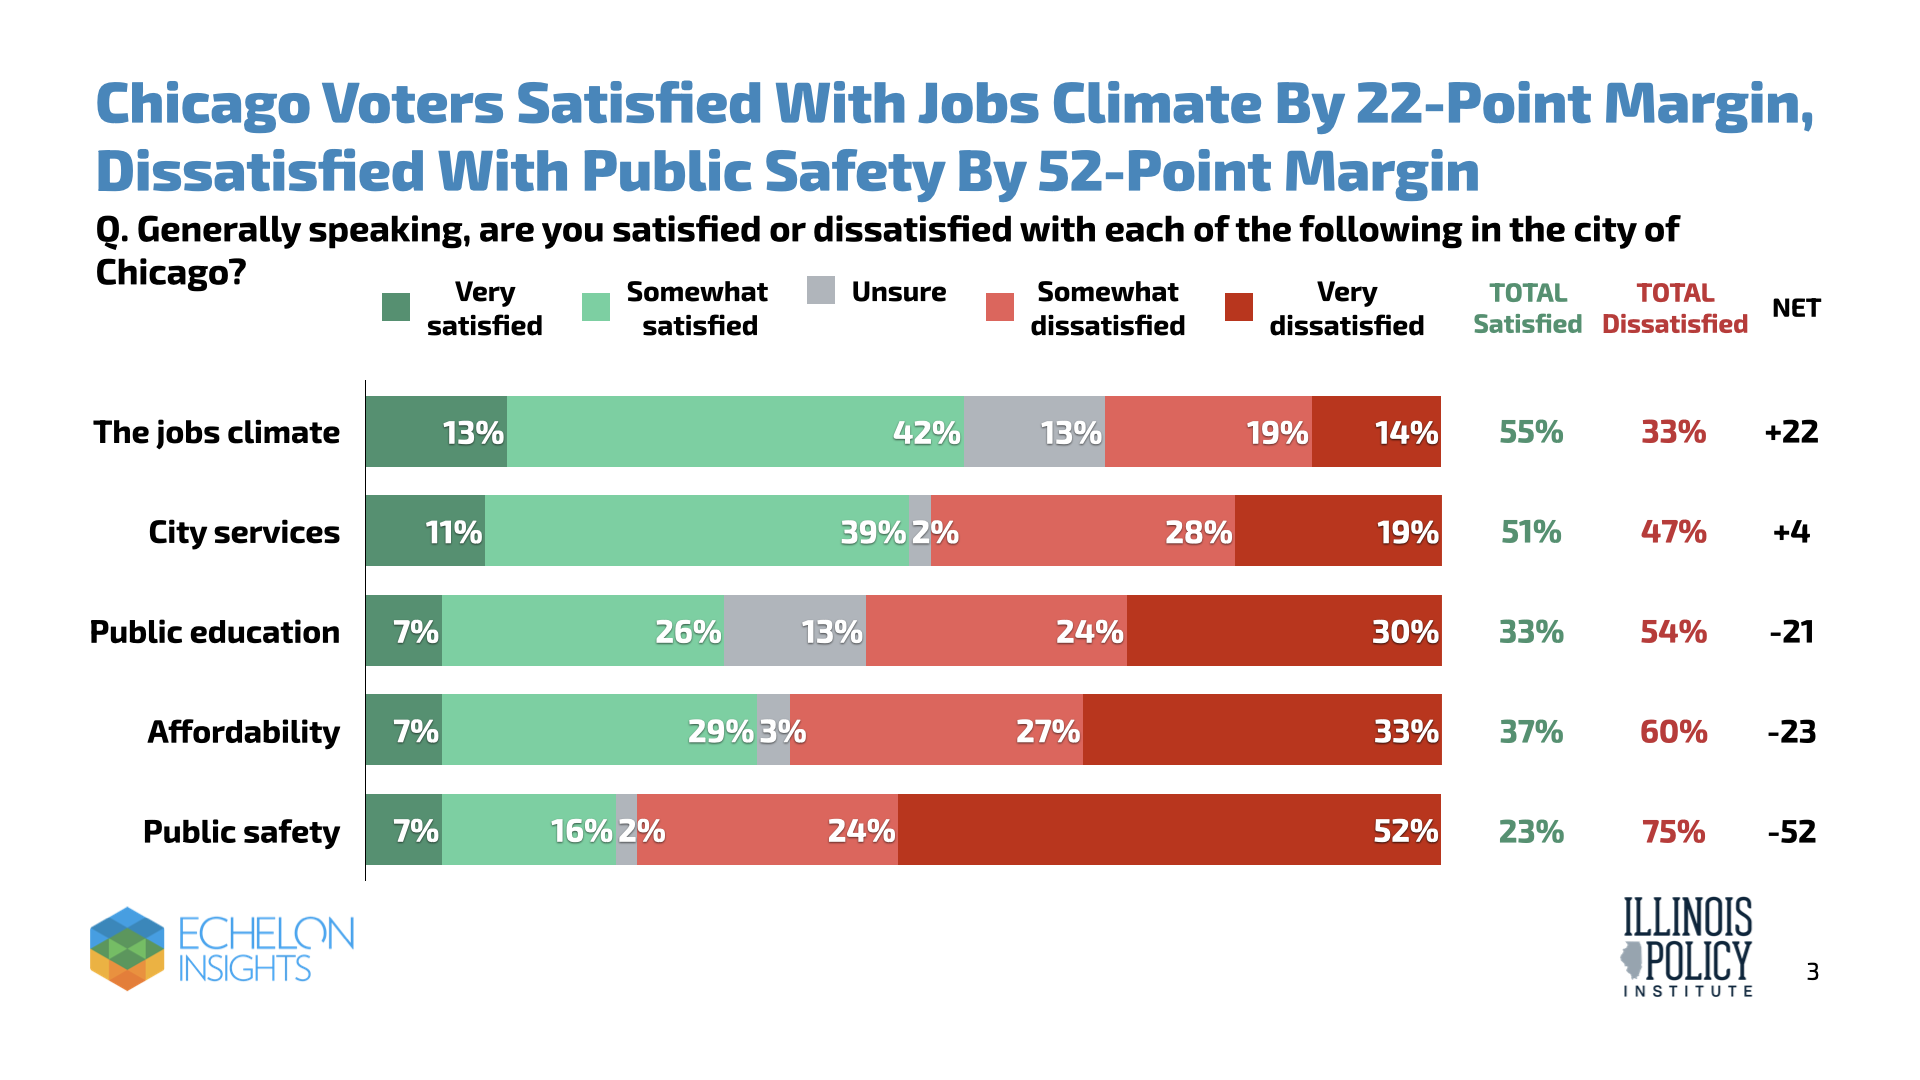 Chicago voters satisfied with jobs climate by 22-point margin, dissatisfied with public safety by 52-point margin